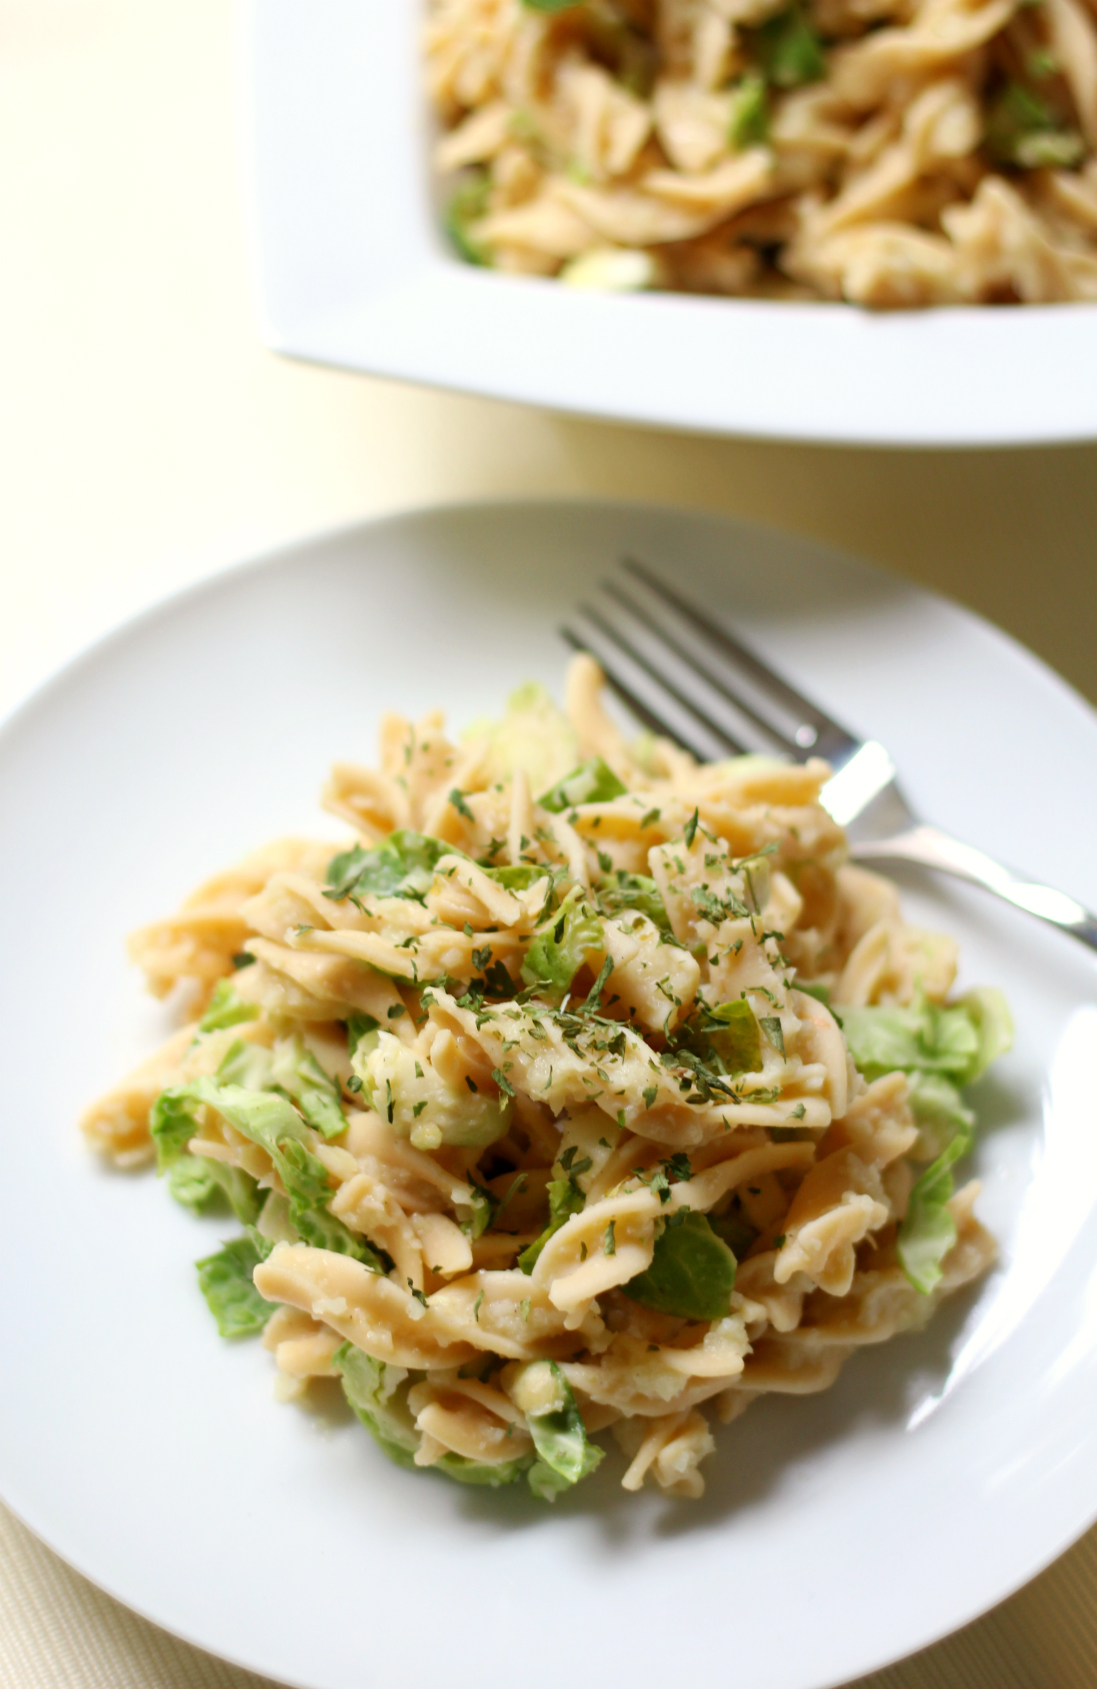 Rotini Pasta Alfredo with Shaved Brussels Sprouts | Strength and Sunshine @RebeccaGF666 A healthy veggie-packed, grain-free rotini pasta Alfredo that you won't know is gluten-free or vegan! The ultimate comfort food dinner recipe you can make to nourish the whole family (and get them to eat brussels sprouts)!